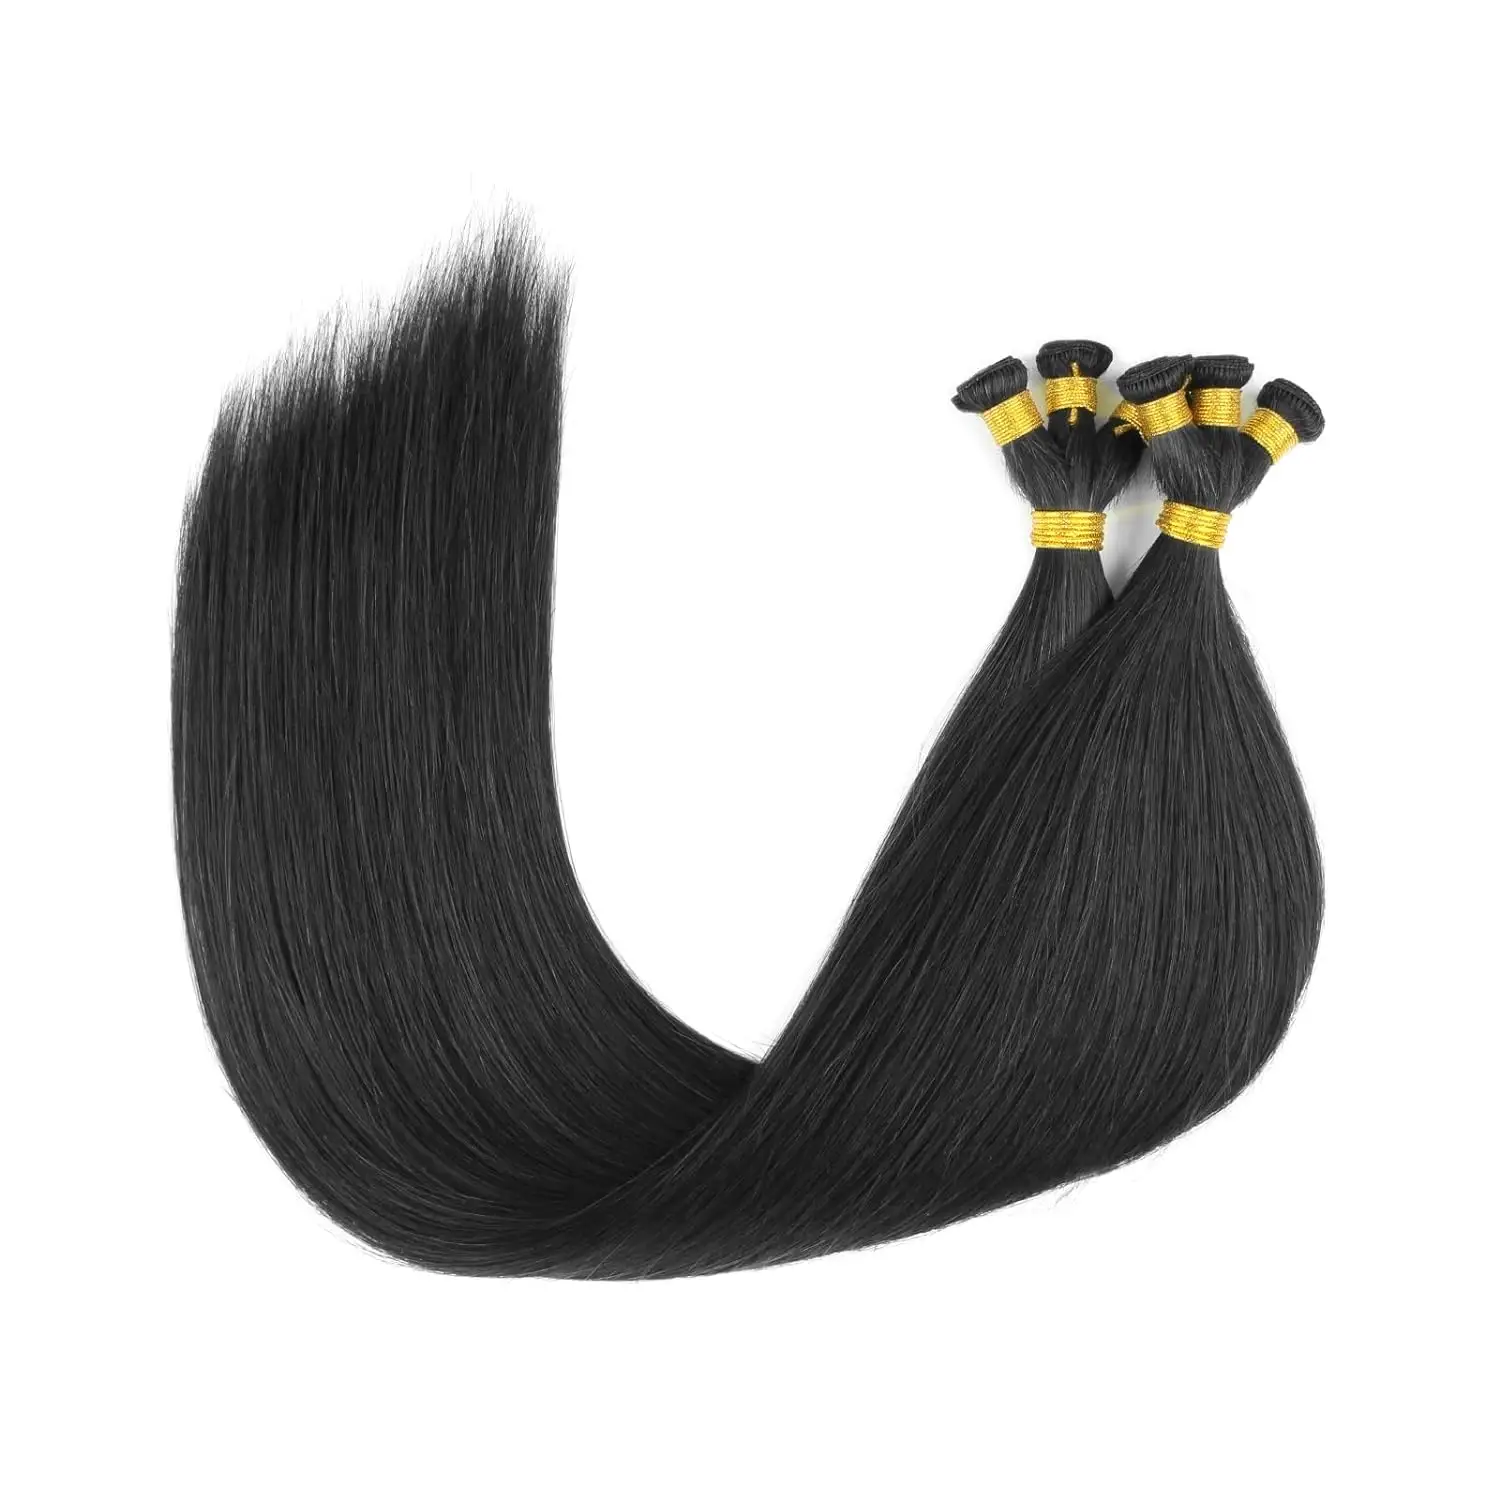 Raw Virgin thin weft natural Color Hand Tied Weft Human Hair Extensions Straight Hand Tied Weft Hair Extensions